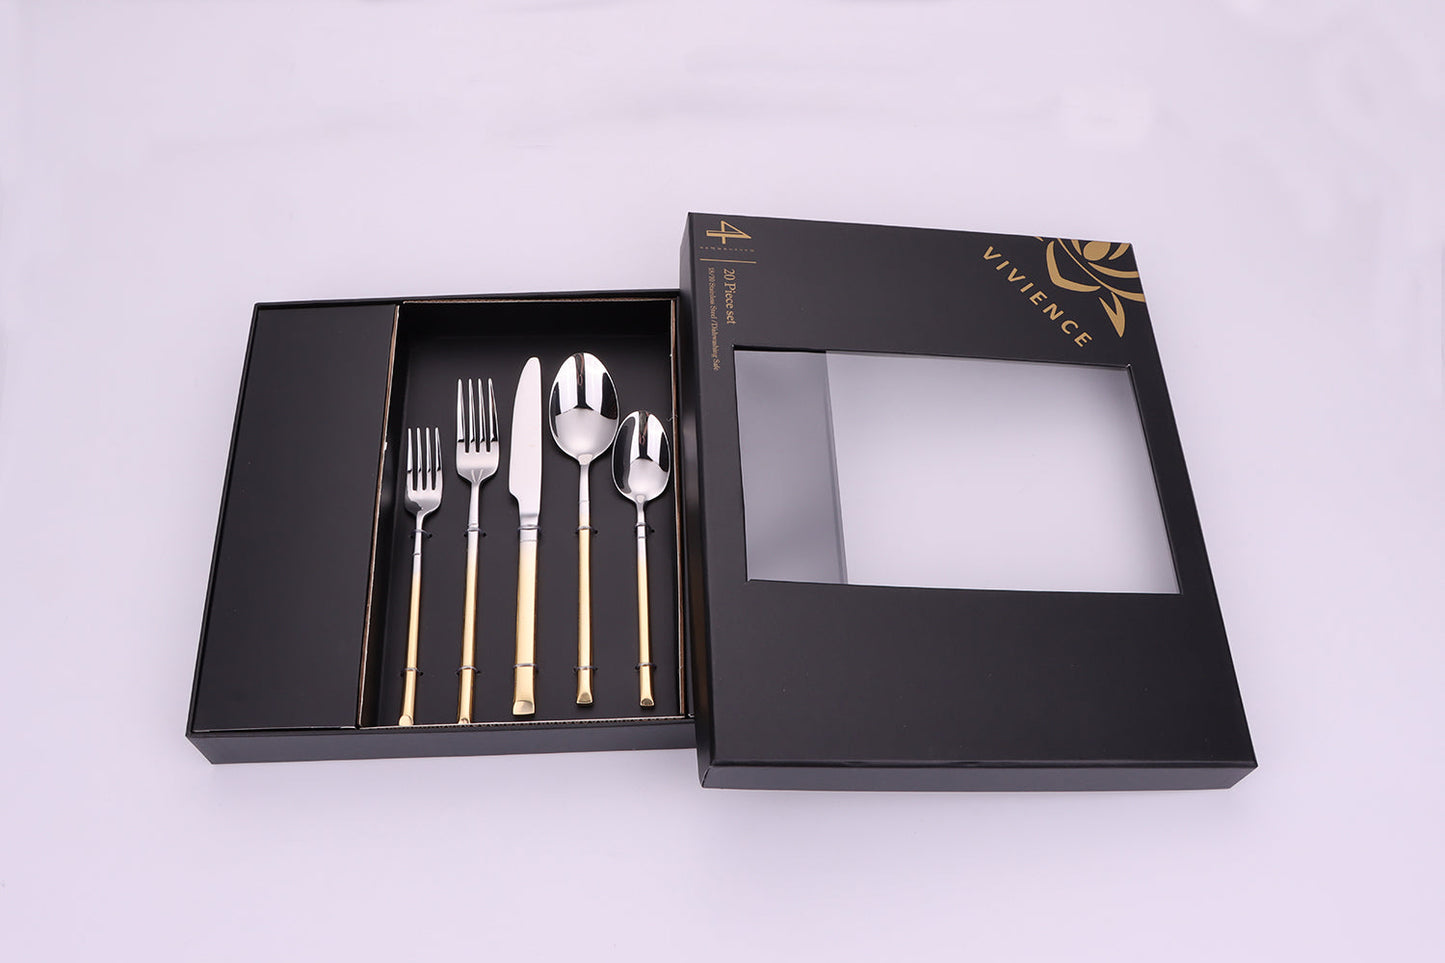 Simplicite 20 Pc Flatware with Graduated Gold Handles, Service for 4